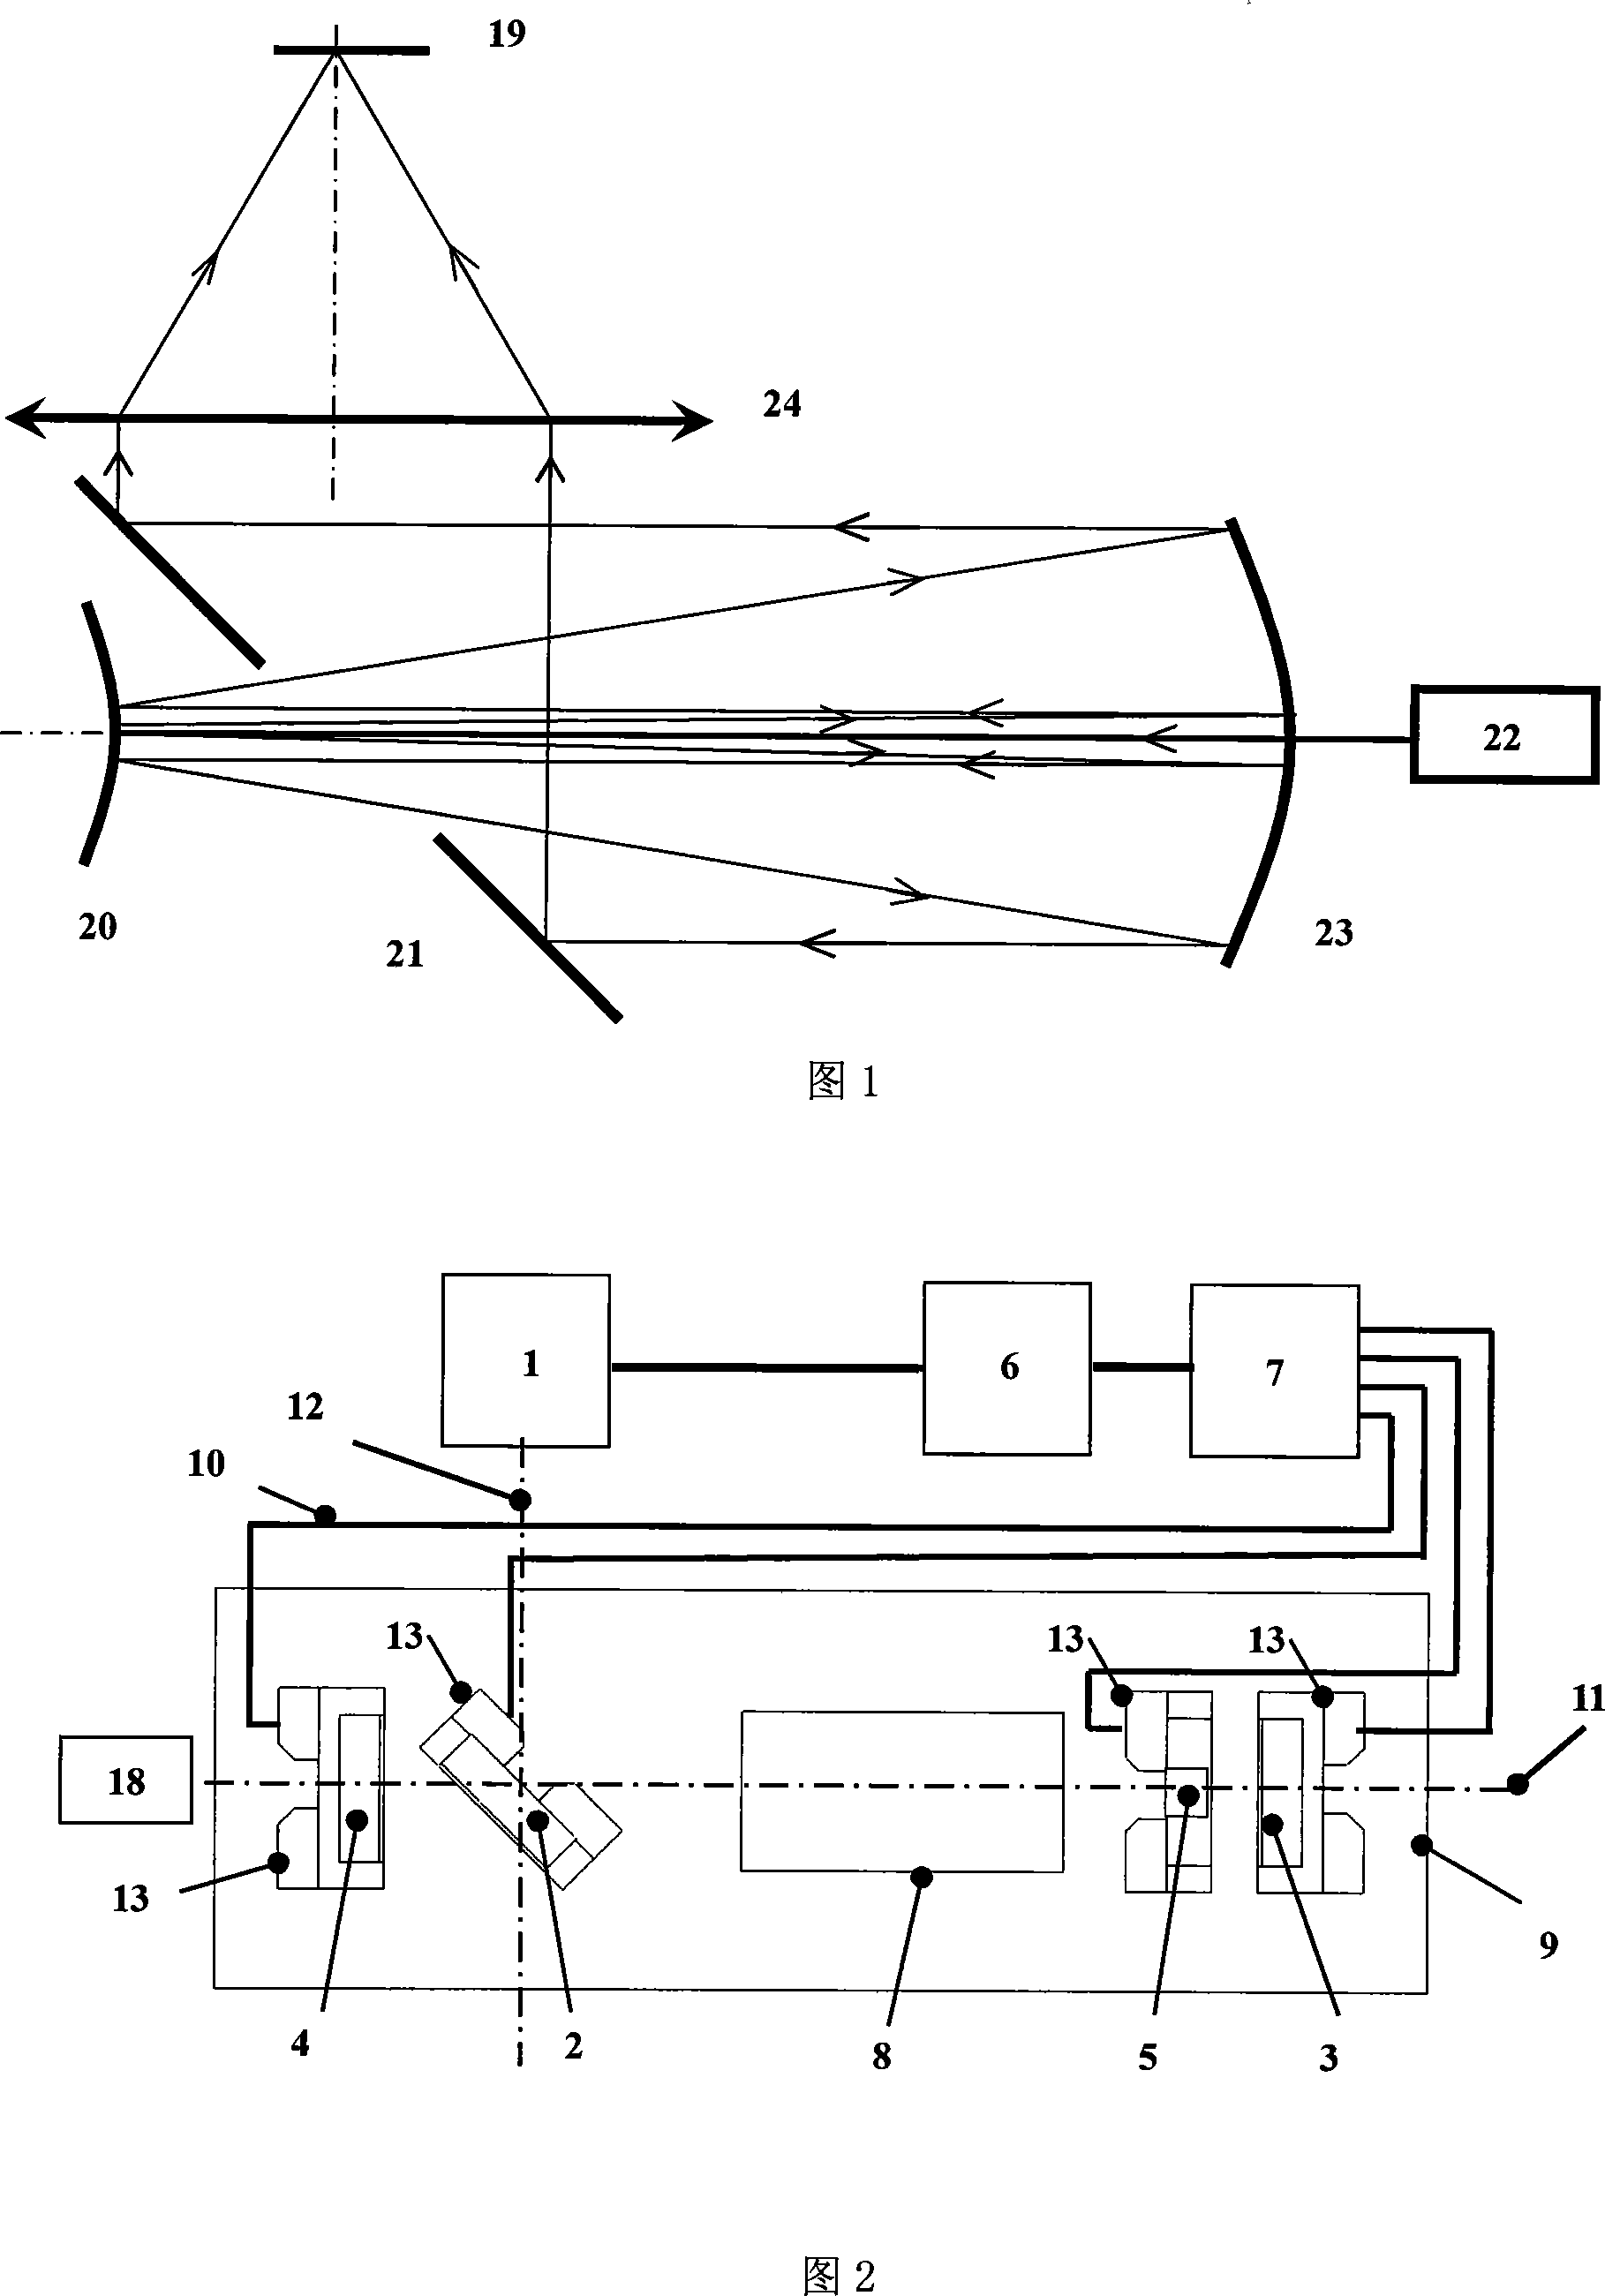 Unstable resonator automatic cavity-adjusting system and method using self-collimation feedback light path